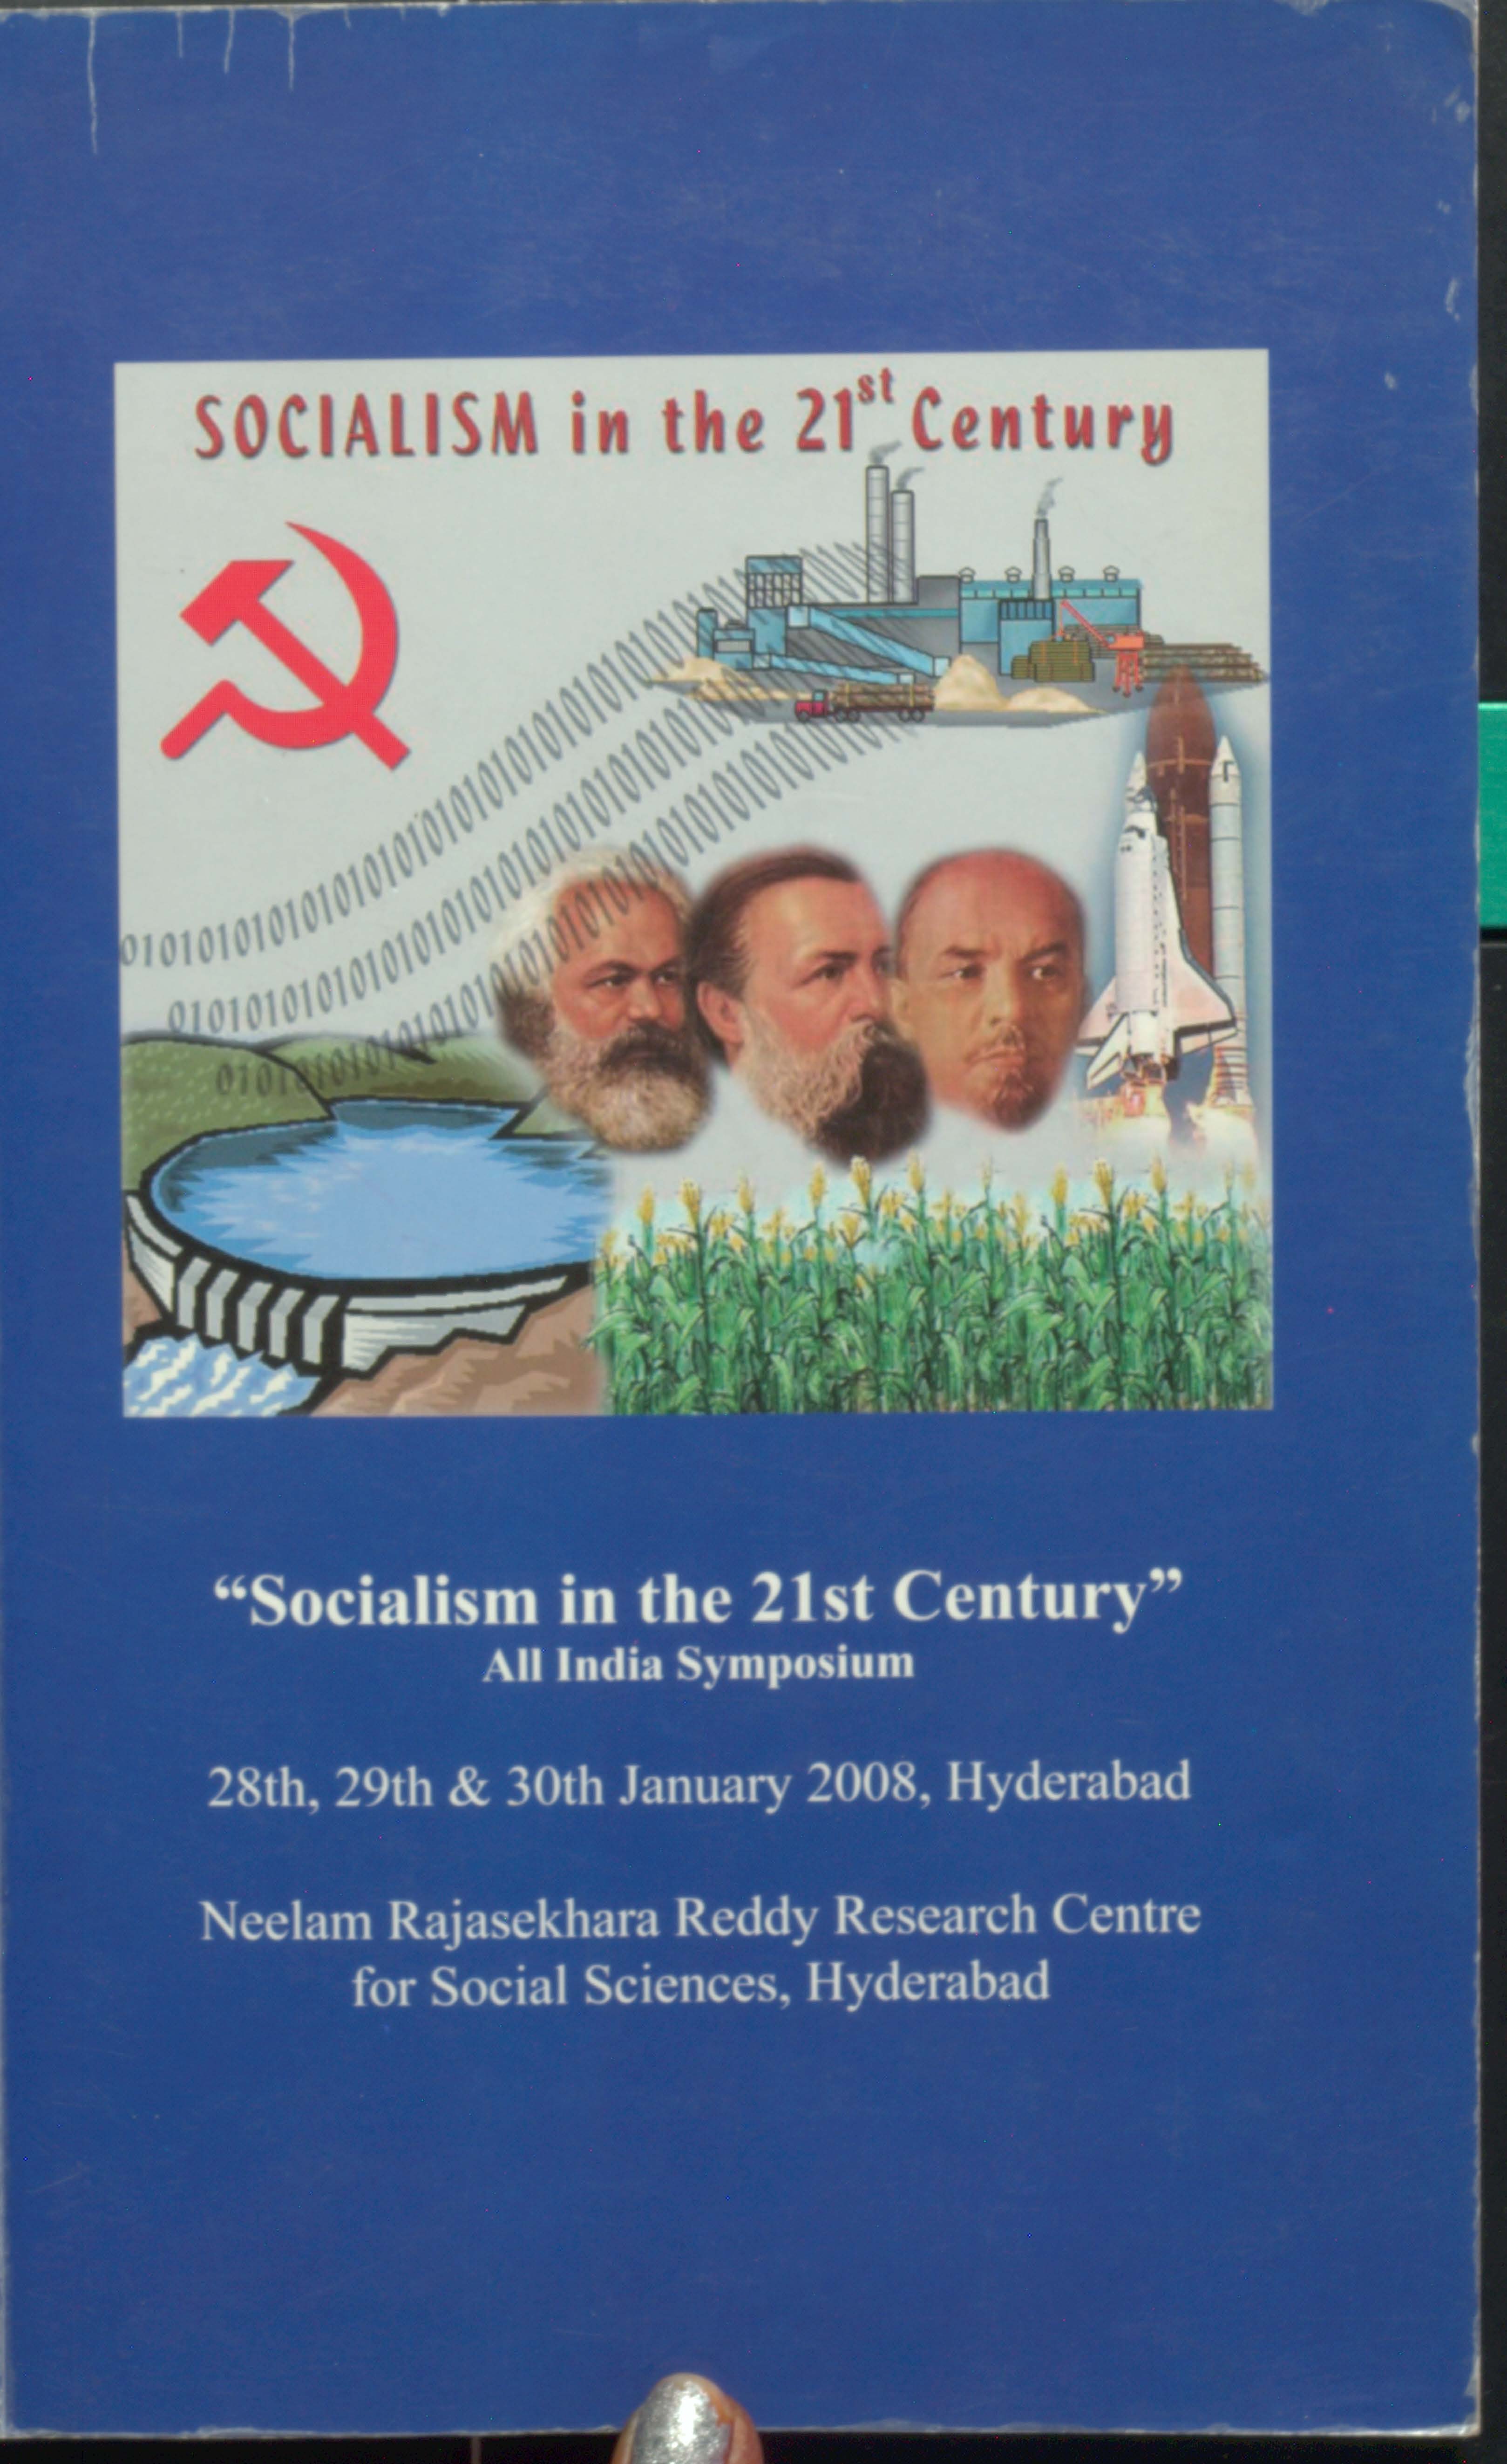 Socilalism in the 21st cetury